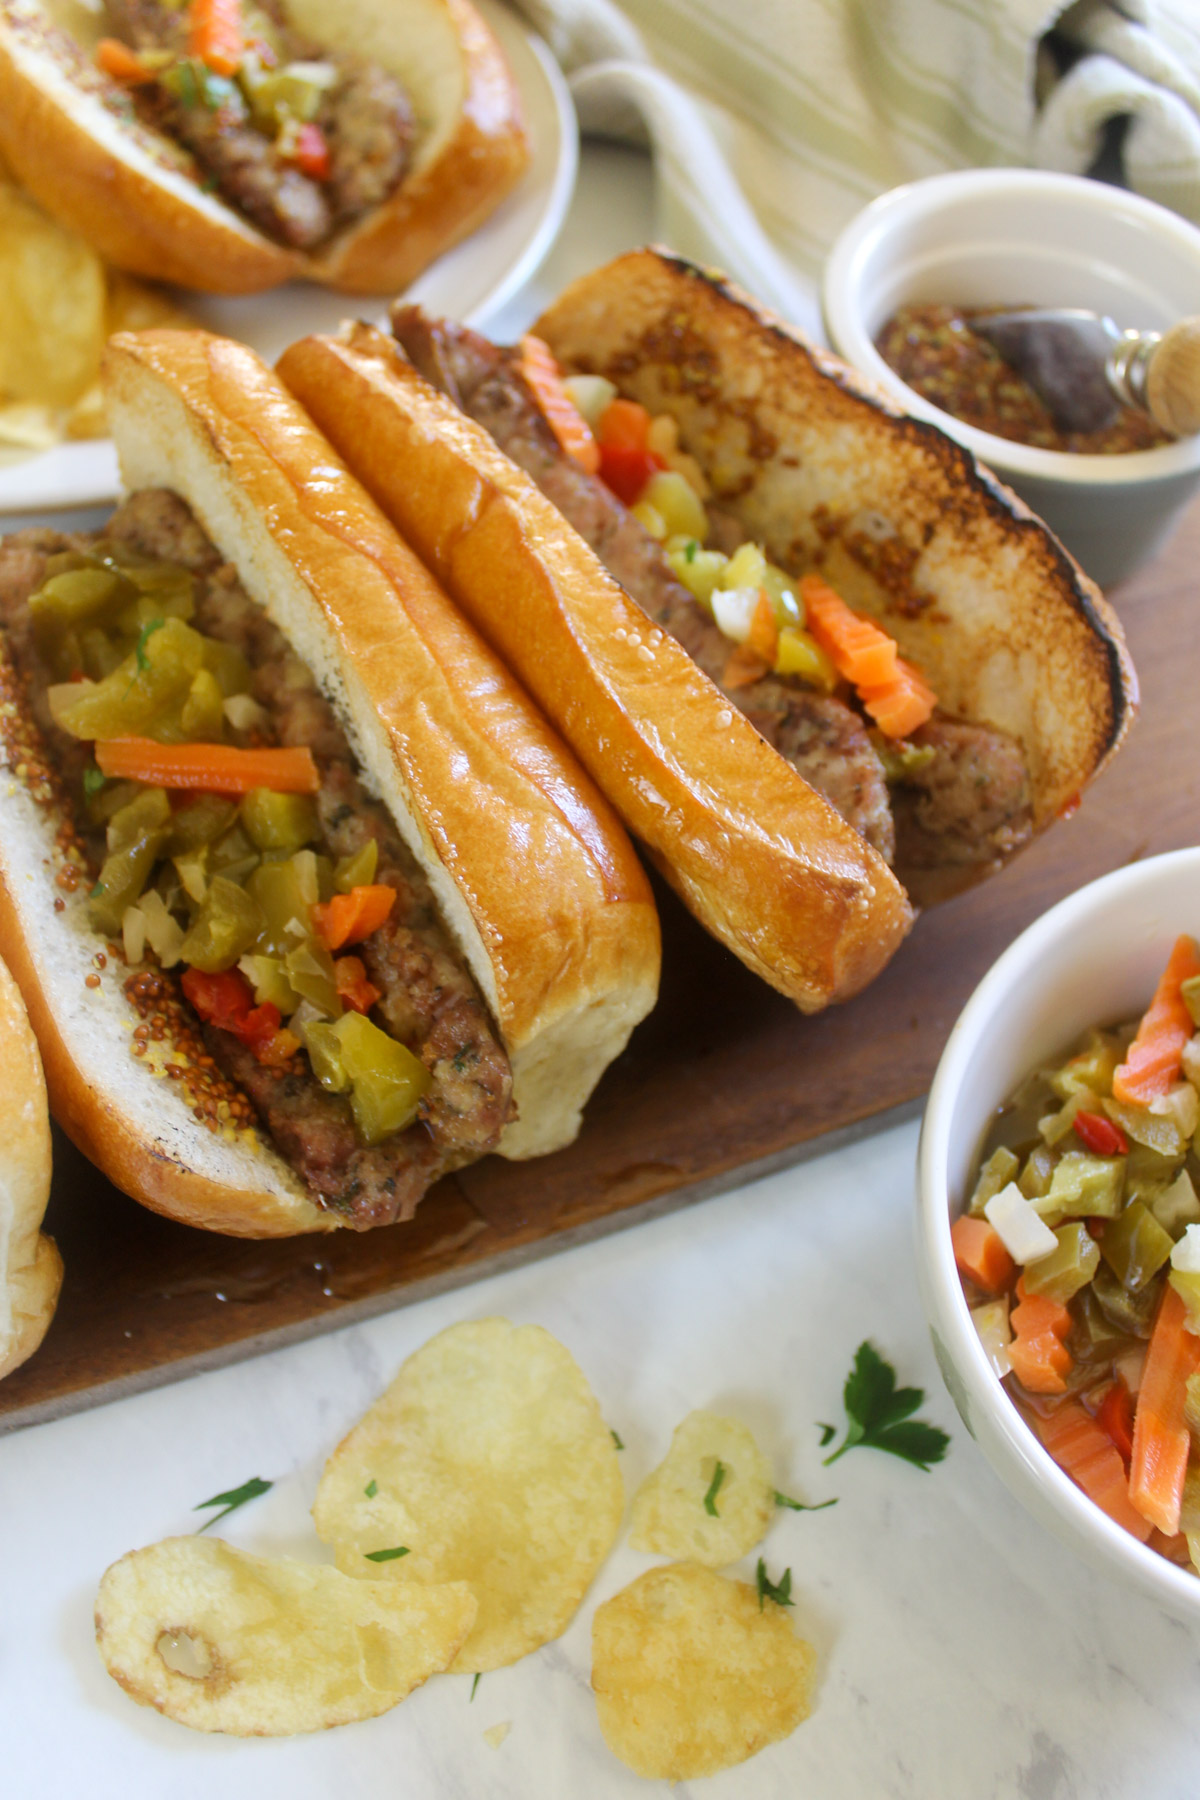 Grilled Italian sausage links in buns with giardiniera and potato chips.